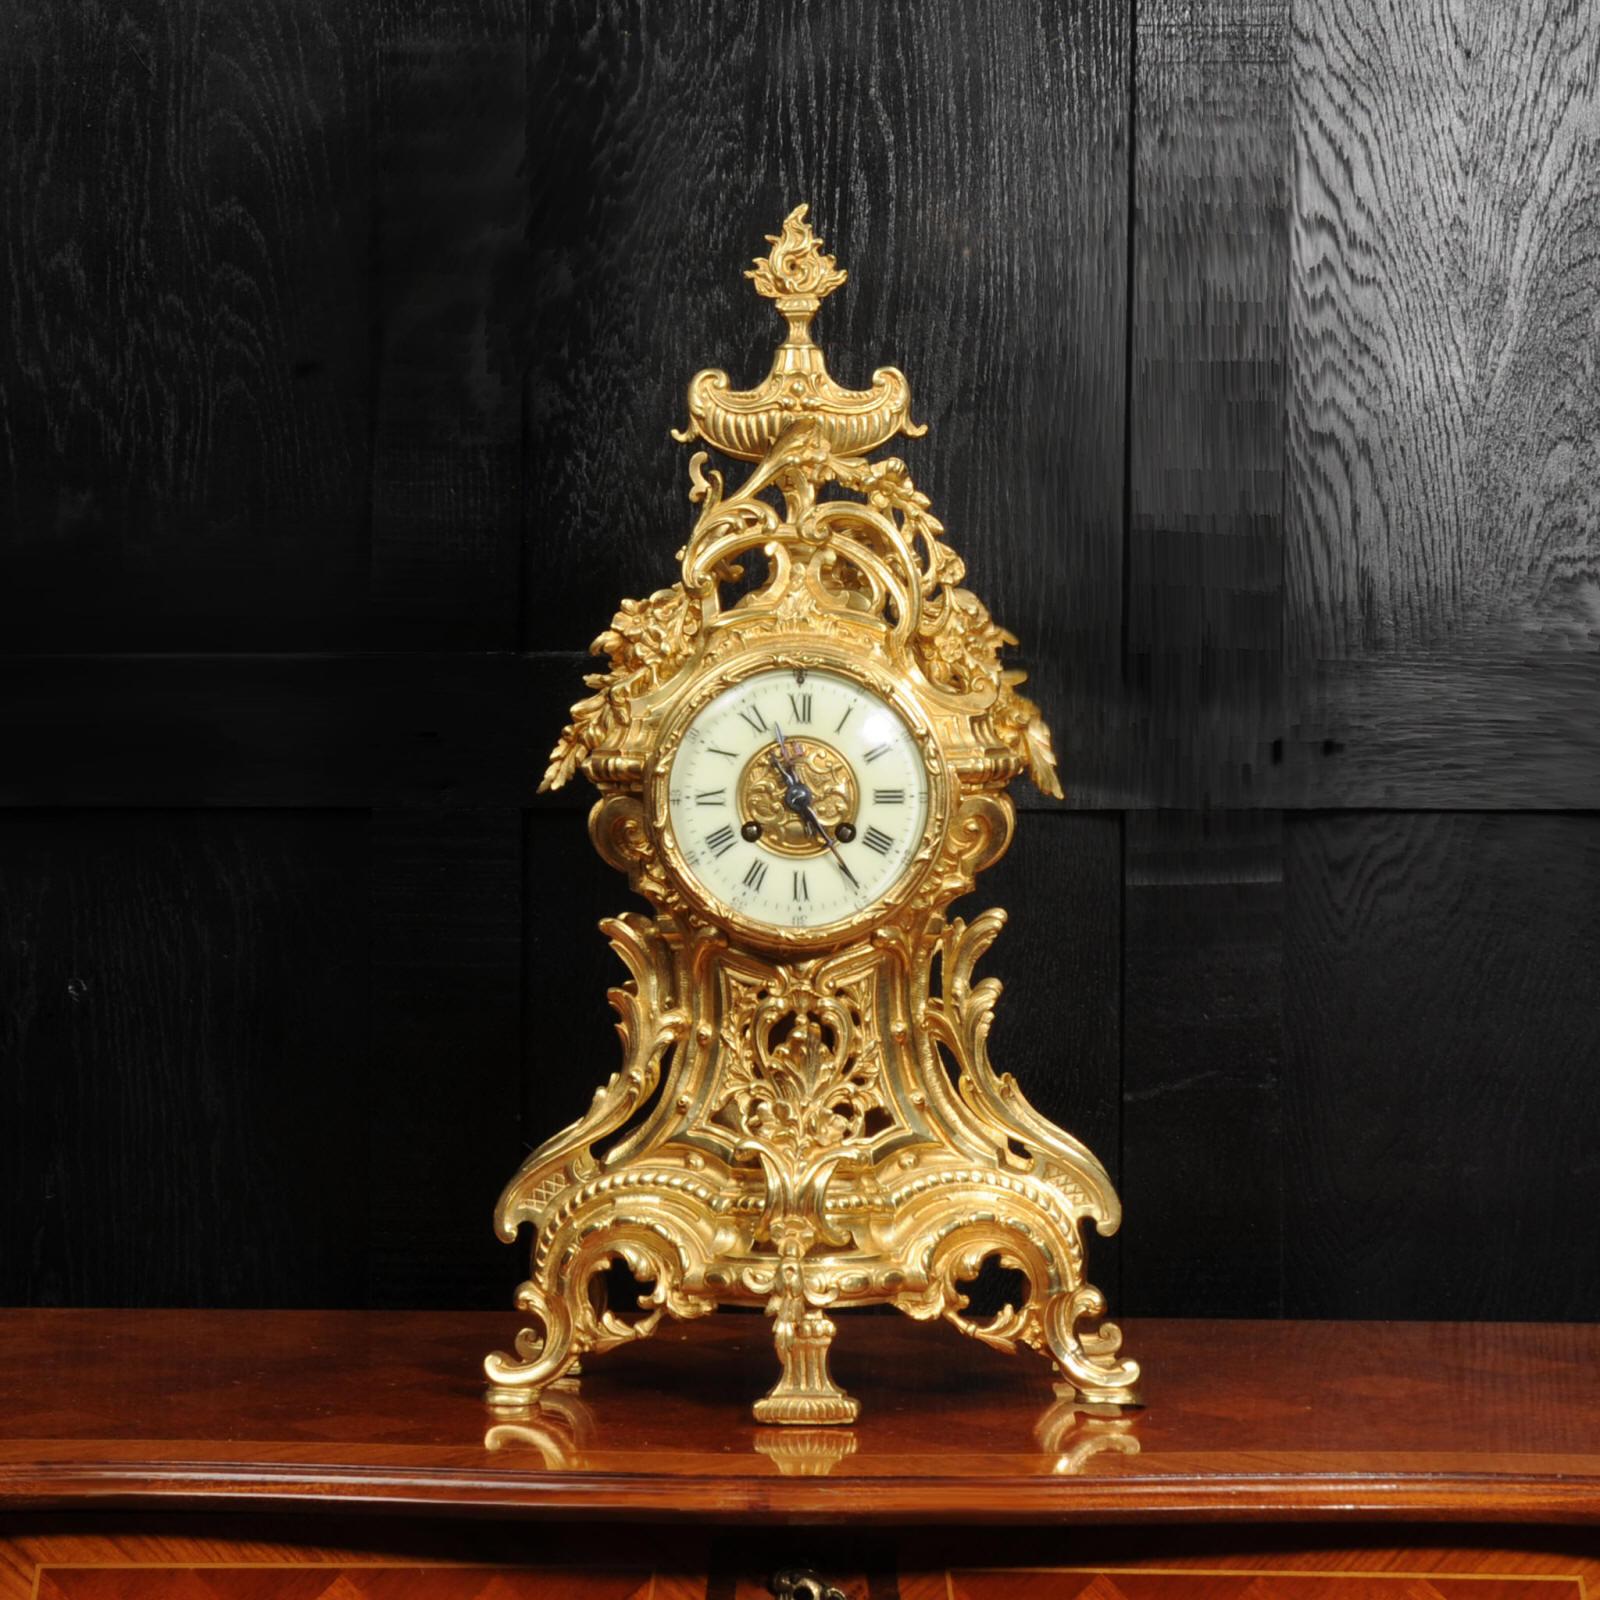 A large and impressive original antique French clock by Louis Japy. It is beautifully made in gilded bronze in the Louis XV style. Waisted case with a fretted front to allow a glimpse of the pendulum gently swinging inside. Profusely decorated with